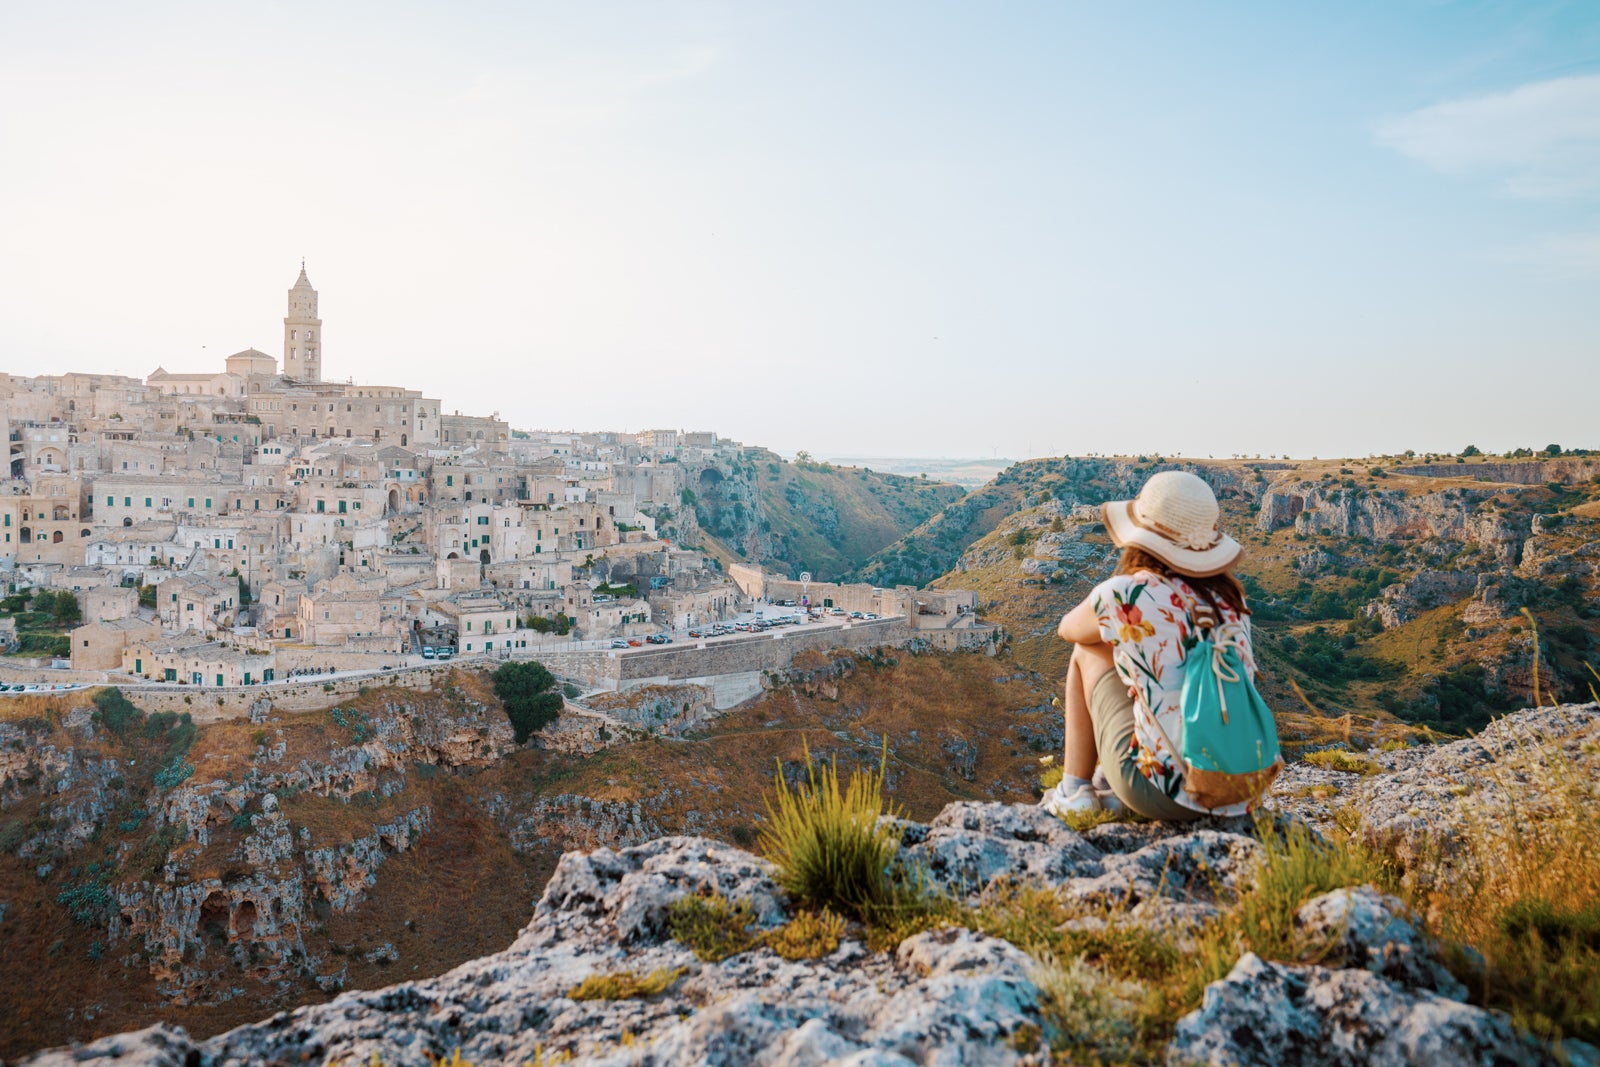 Young Woman tourist with hat admiring the view of Matera at sunset